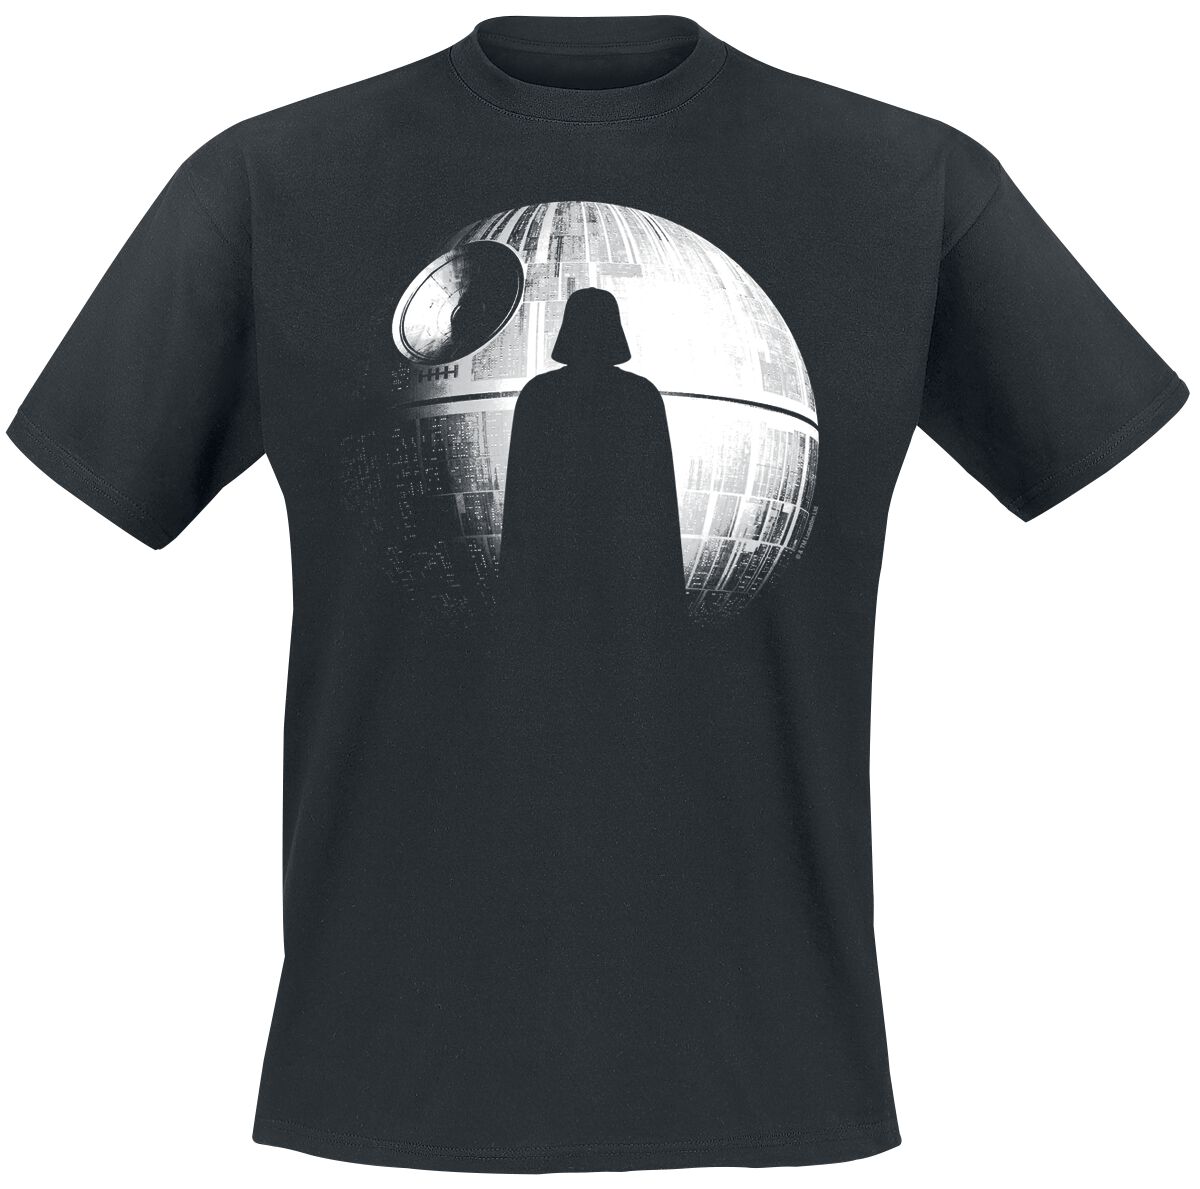 Image of T-Shirt di Star Wars - Rogue One - Death Star - S a M - Uomo - nero